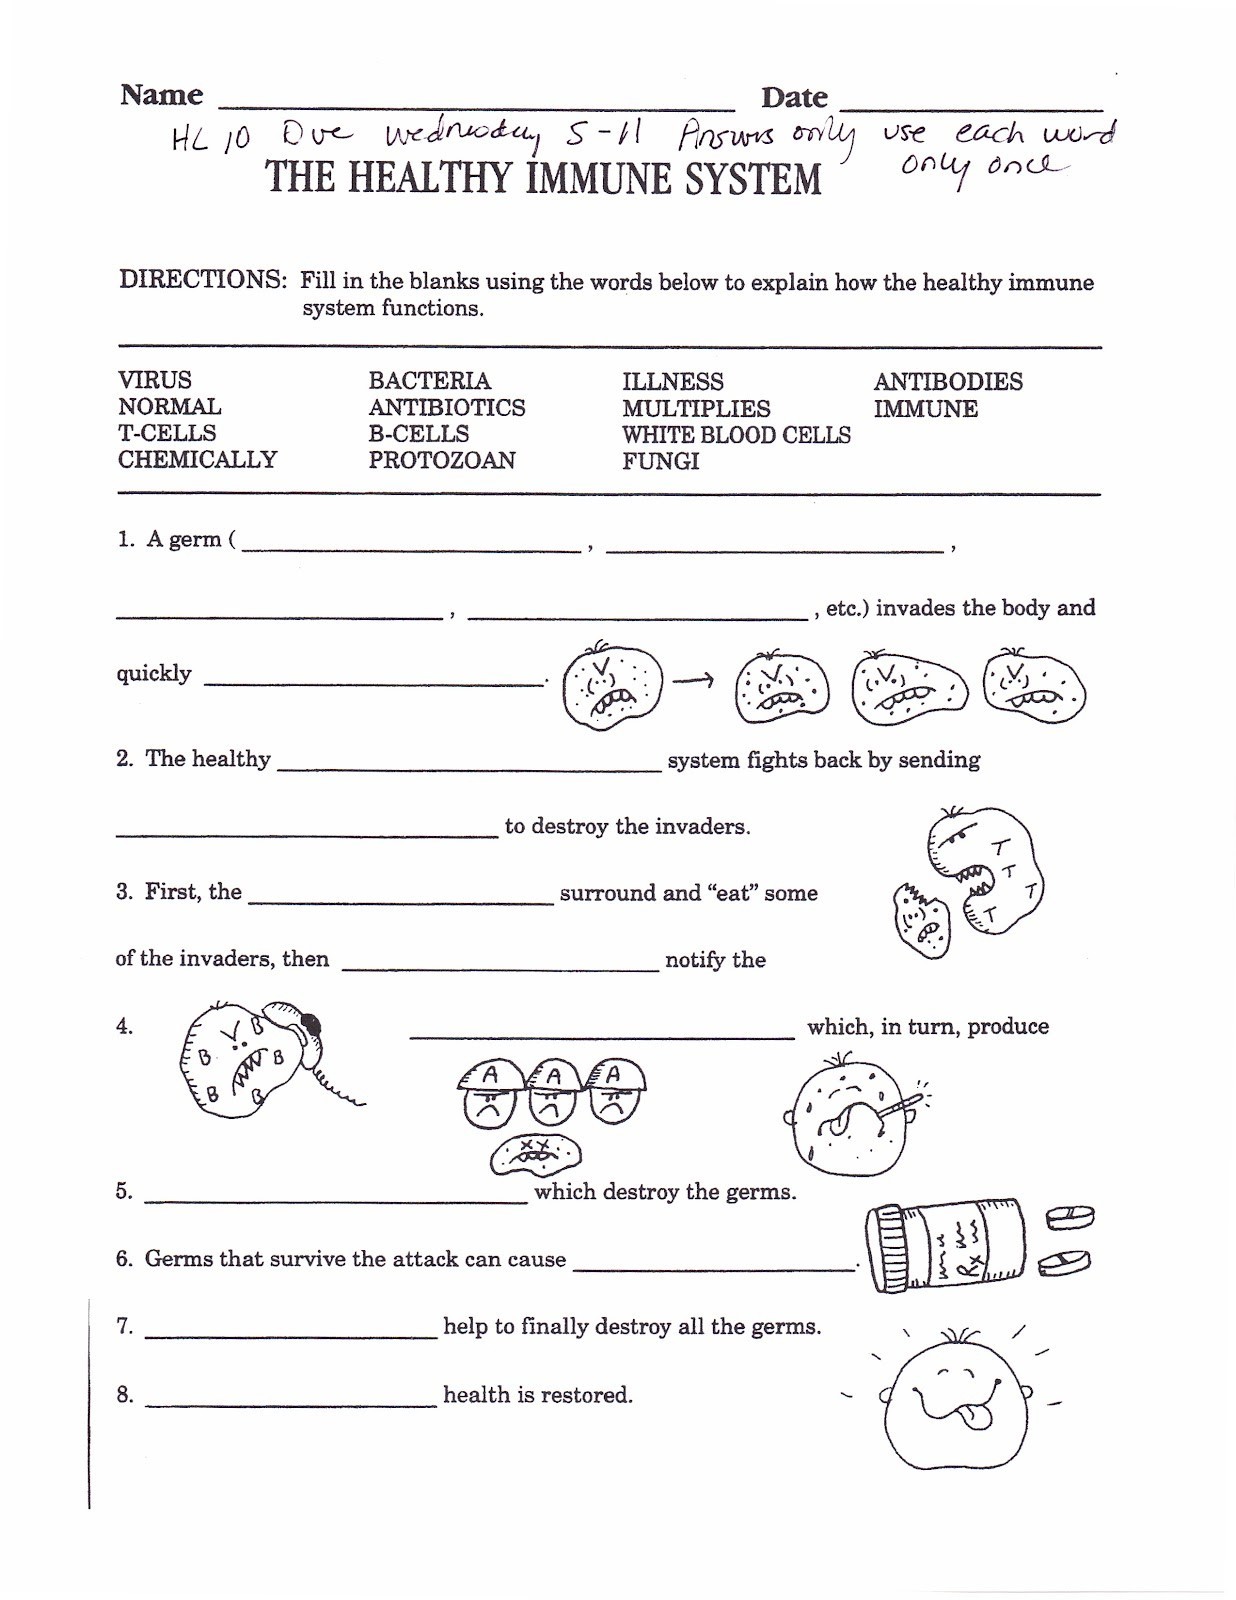 the-healthy-immune-system-worksheets-answers